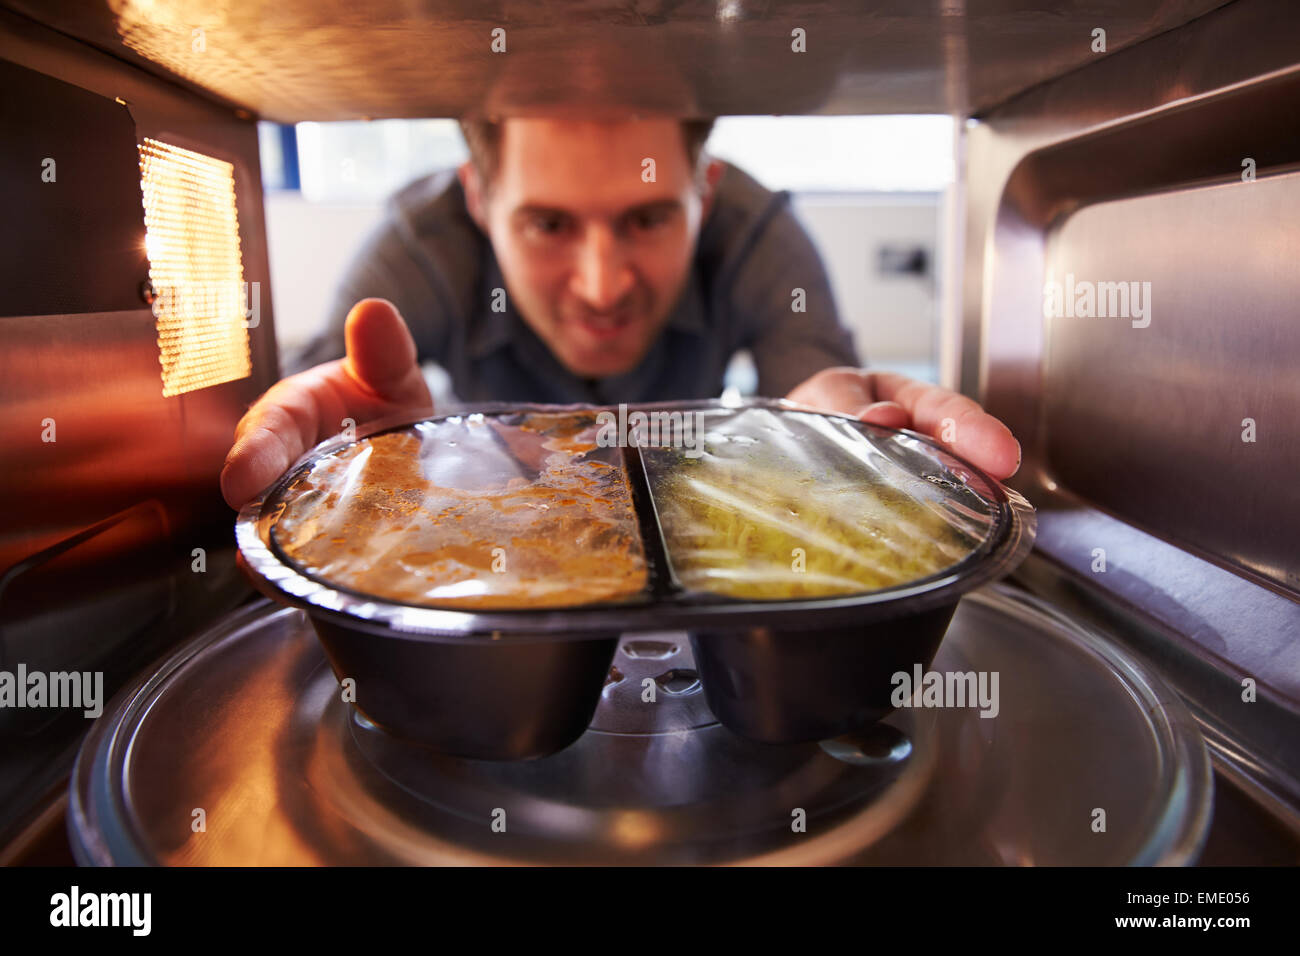 Man Putting TV Dinner Into Microwave Oven To Cook Stock Photo